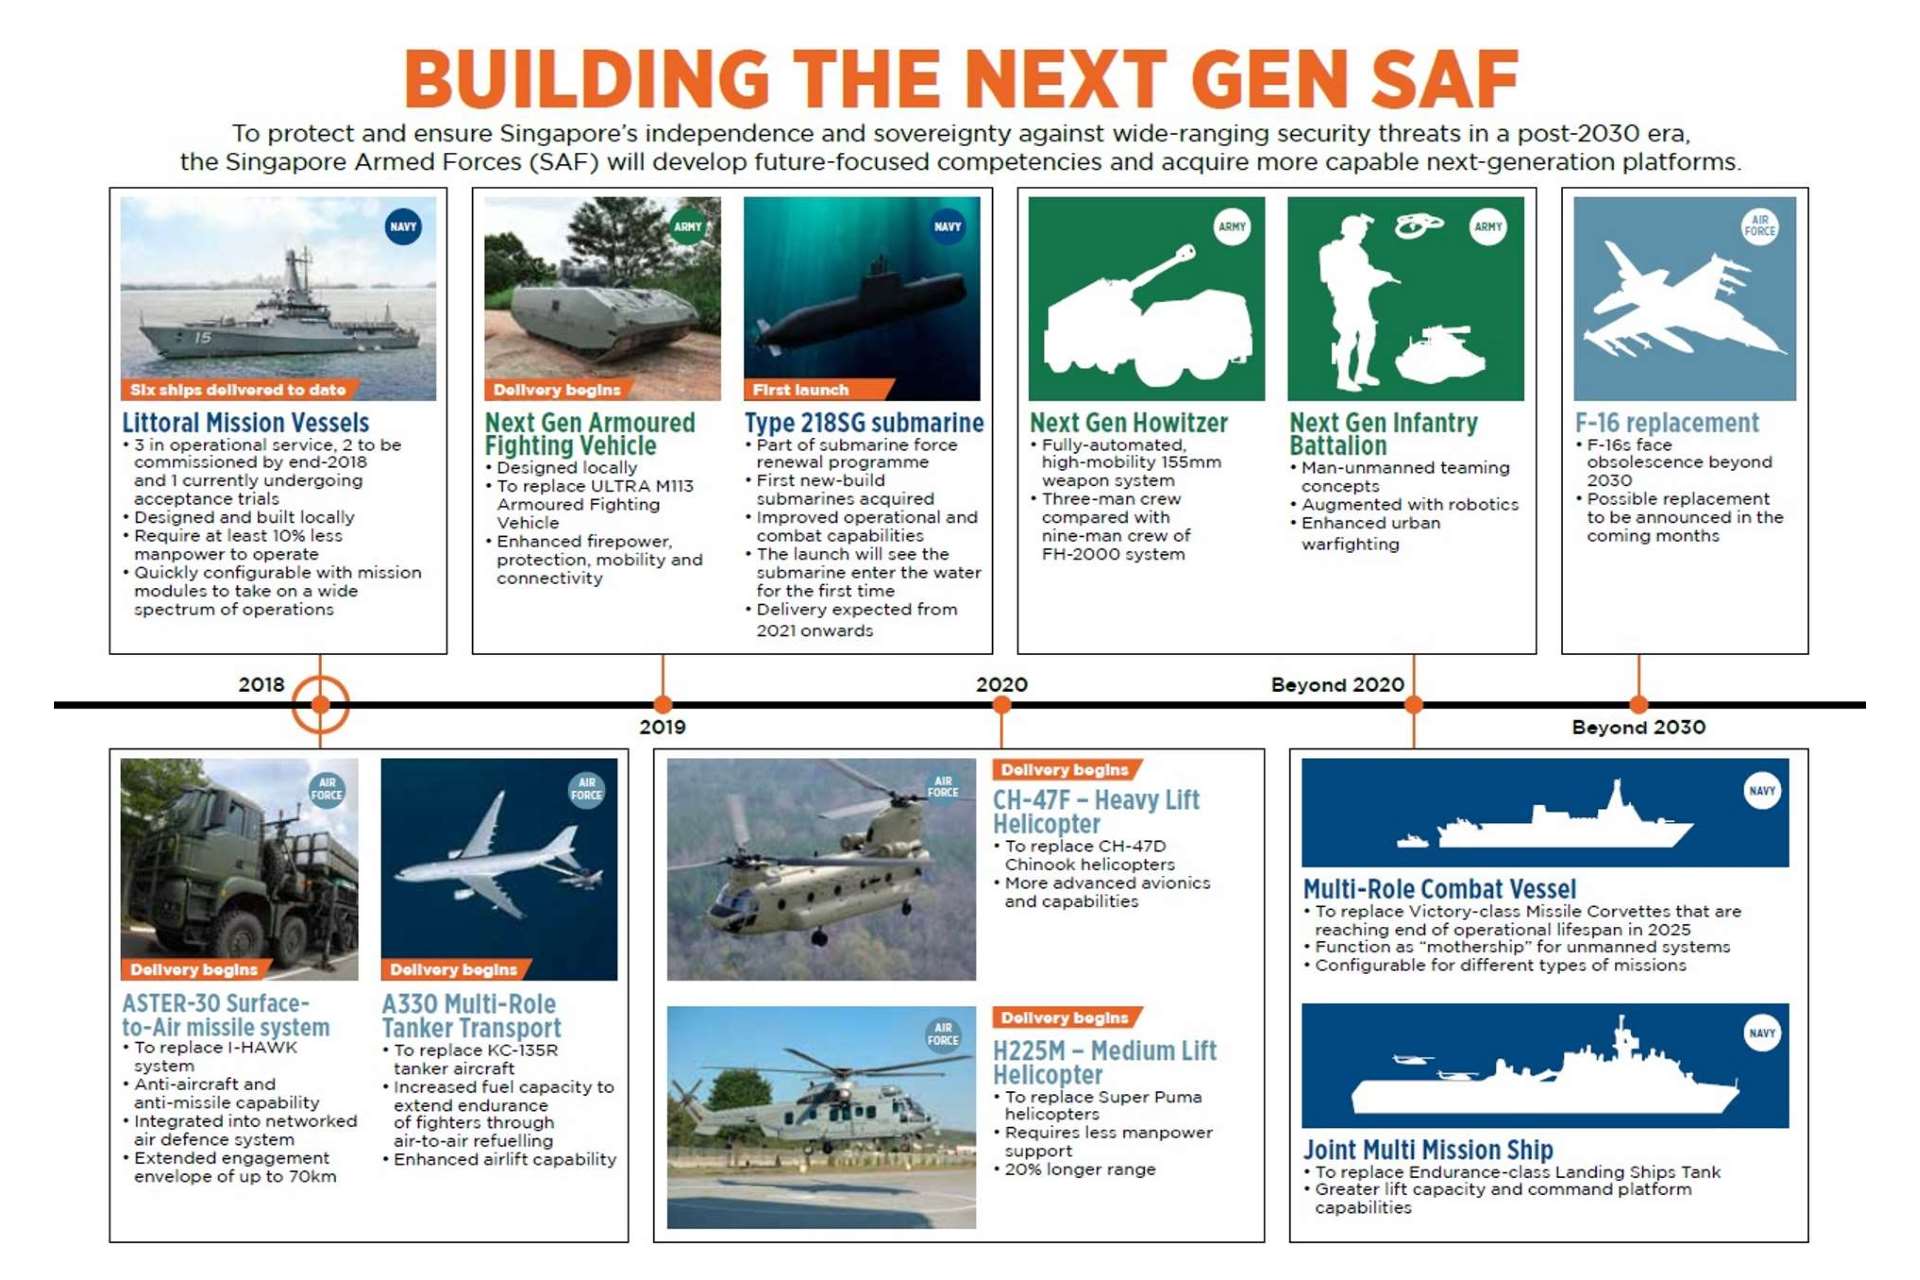 https://www.mindef.gov.sg/web/wcm/connect/pioneer/3a6cb8ee-2ebe-458e-93fa-73f93d310213/infographic-building-nxt-gen_edited.jpg?MOD=AJPERES&CACHEID=ROOTWORKSPACE.Z18_1QK41482LG0G10Q8NM8IUA1051-3a6cb8ee-2ebe-458e-93fa-73f93d310213-o1FmTUF